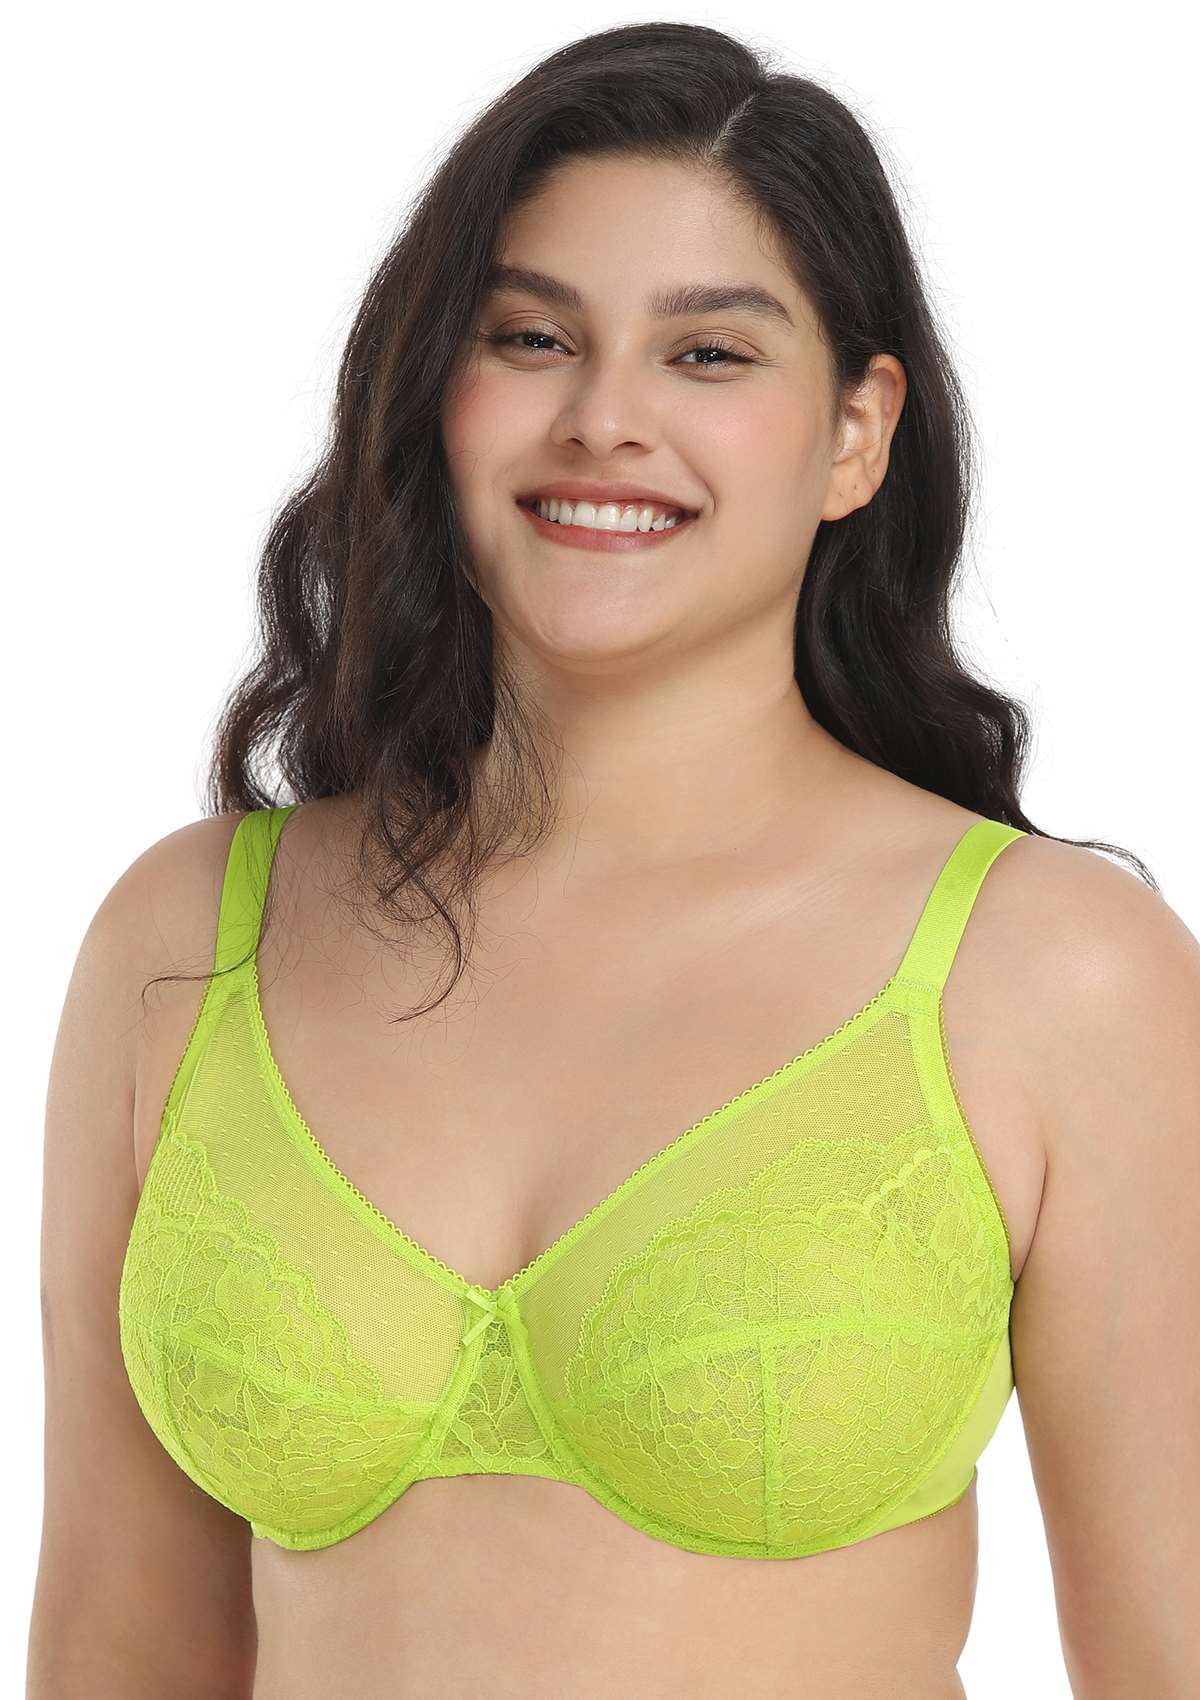 HSIA Enchante Full Cup Minimizing Bra: Supportive Unlined Lace Bra - Lime Green / 40 / DD/E